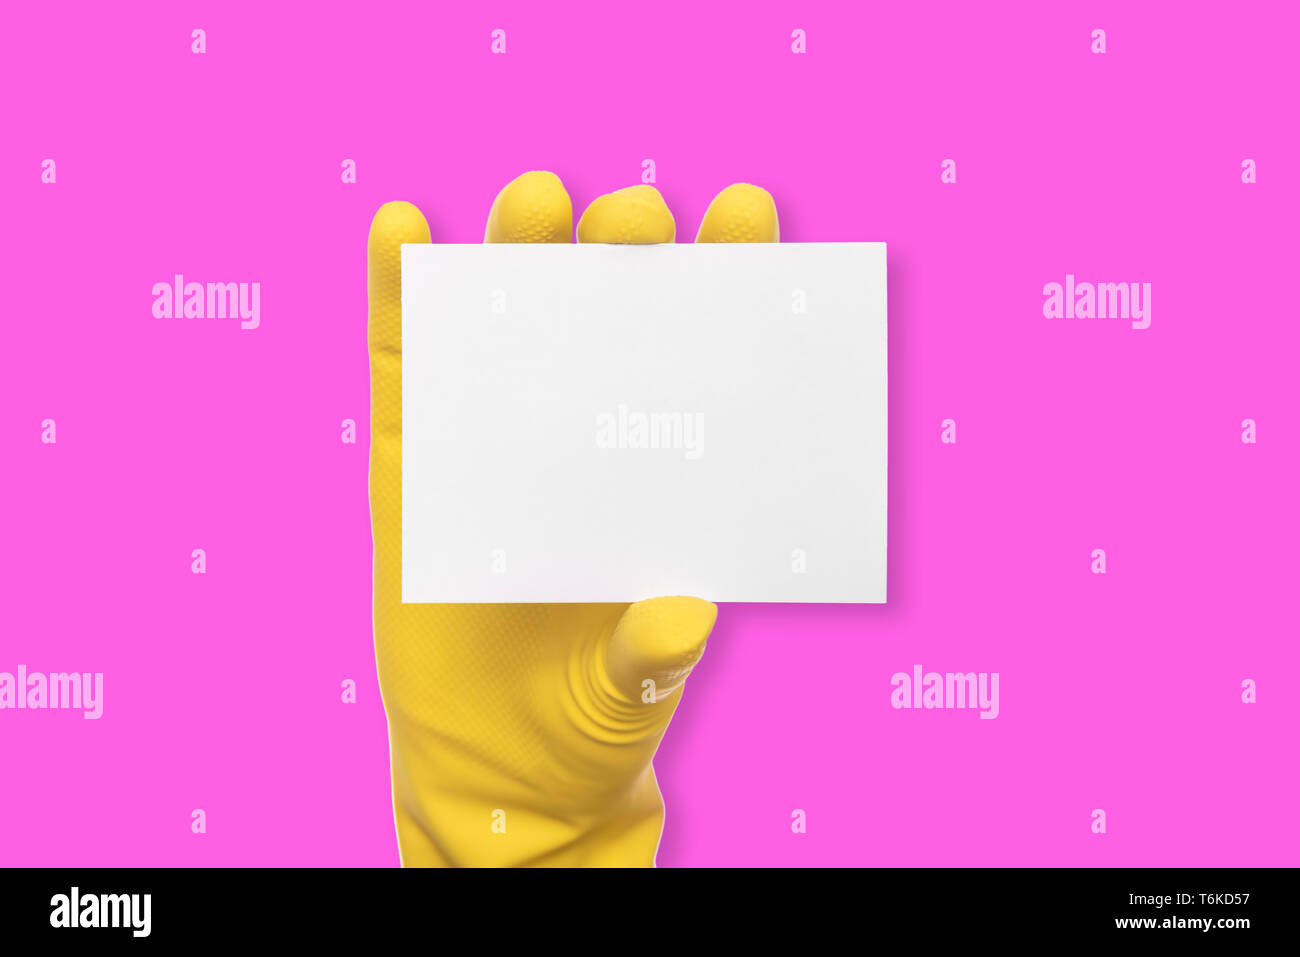 A rubber-gloved hand holds a white blank business card on pink background. Stock Photo